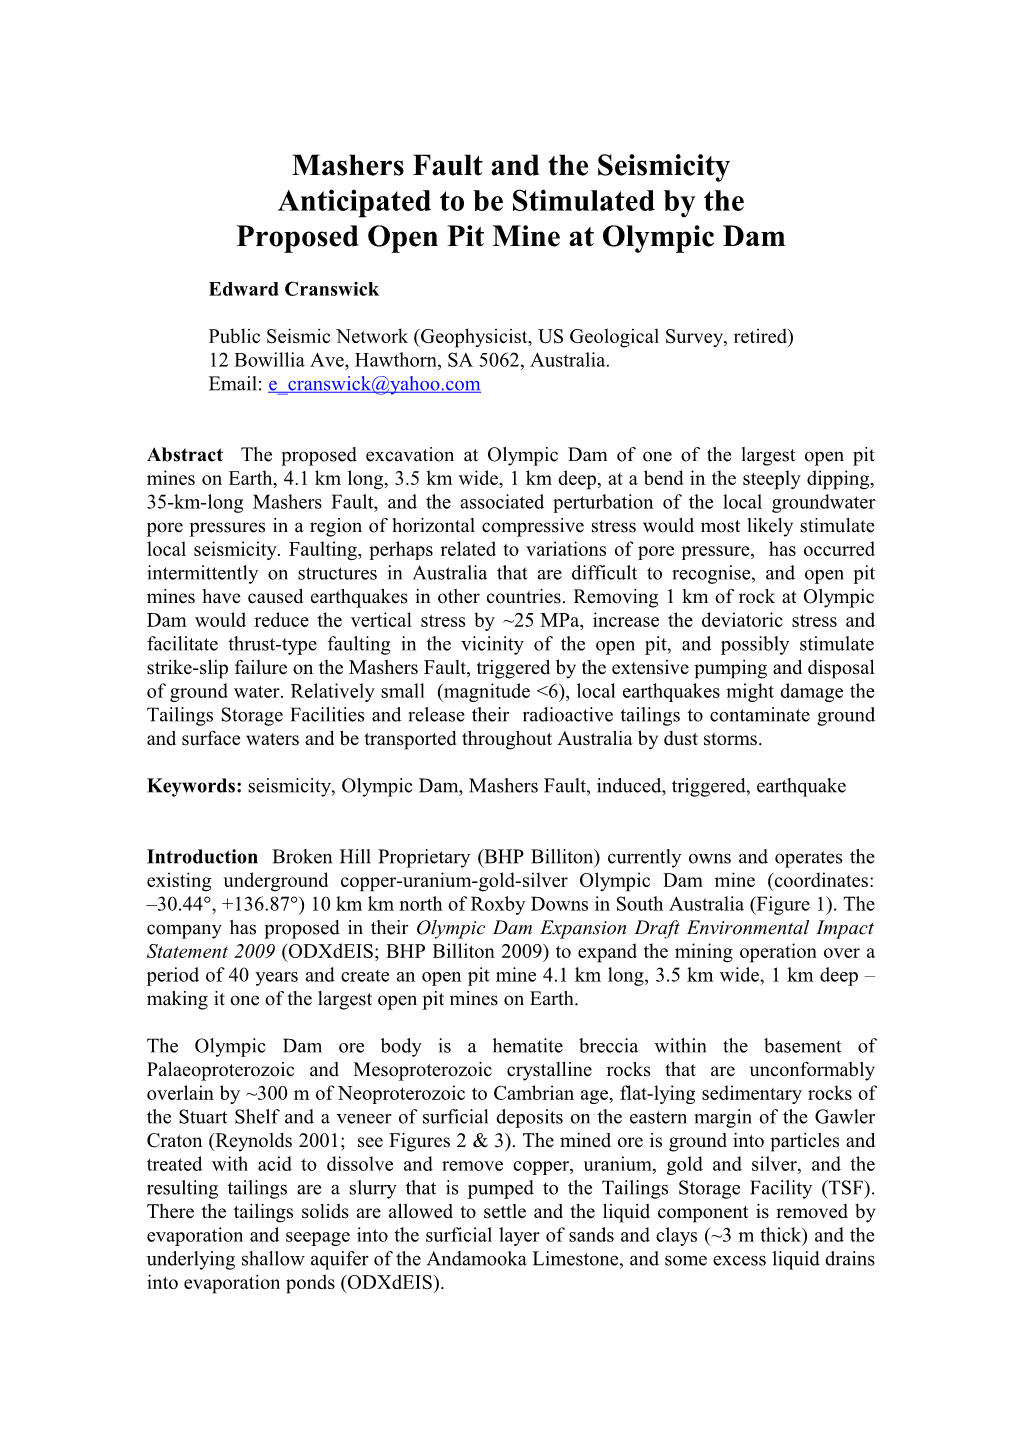 Mashers Fault and the Seismicity Anticipated to Be Stimulated by the Proposed Open Pit Mine at Olympic Dam